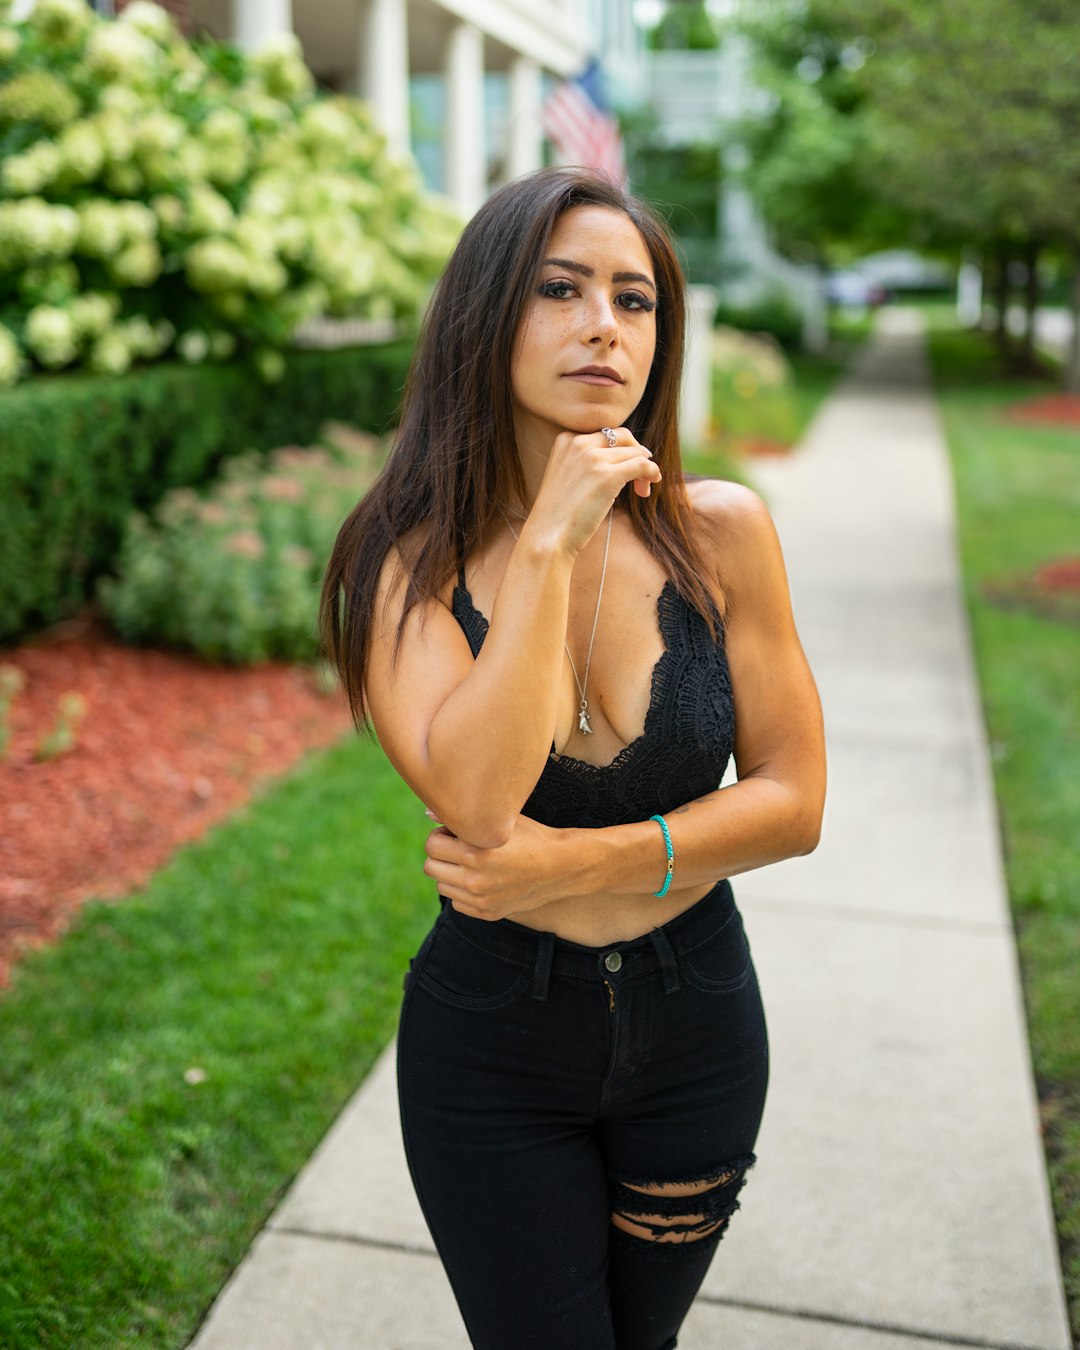 woman in black tank top and black pants standing near green plants during daytime